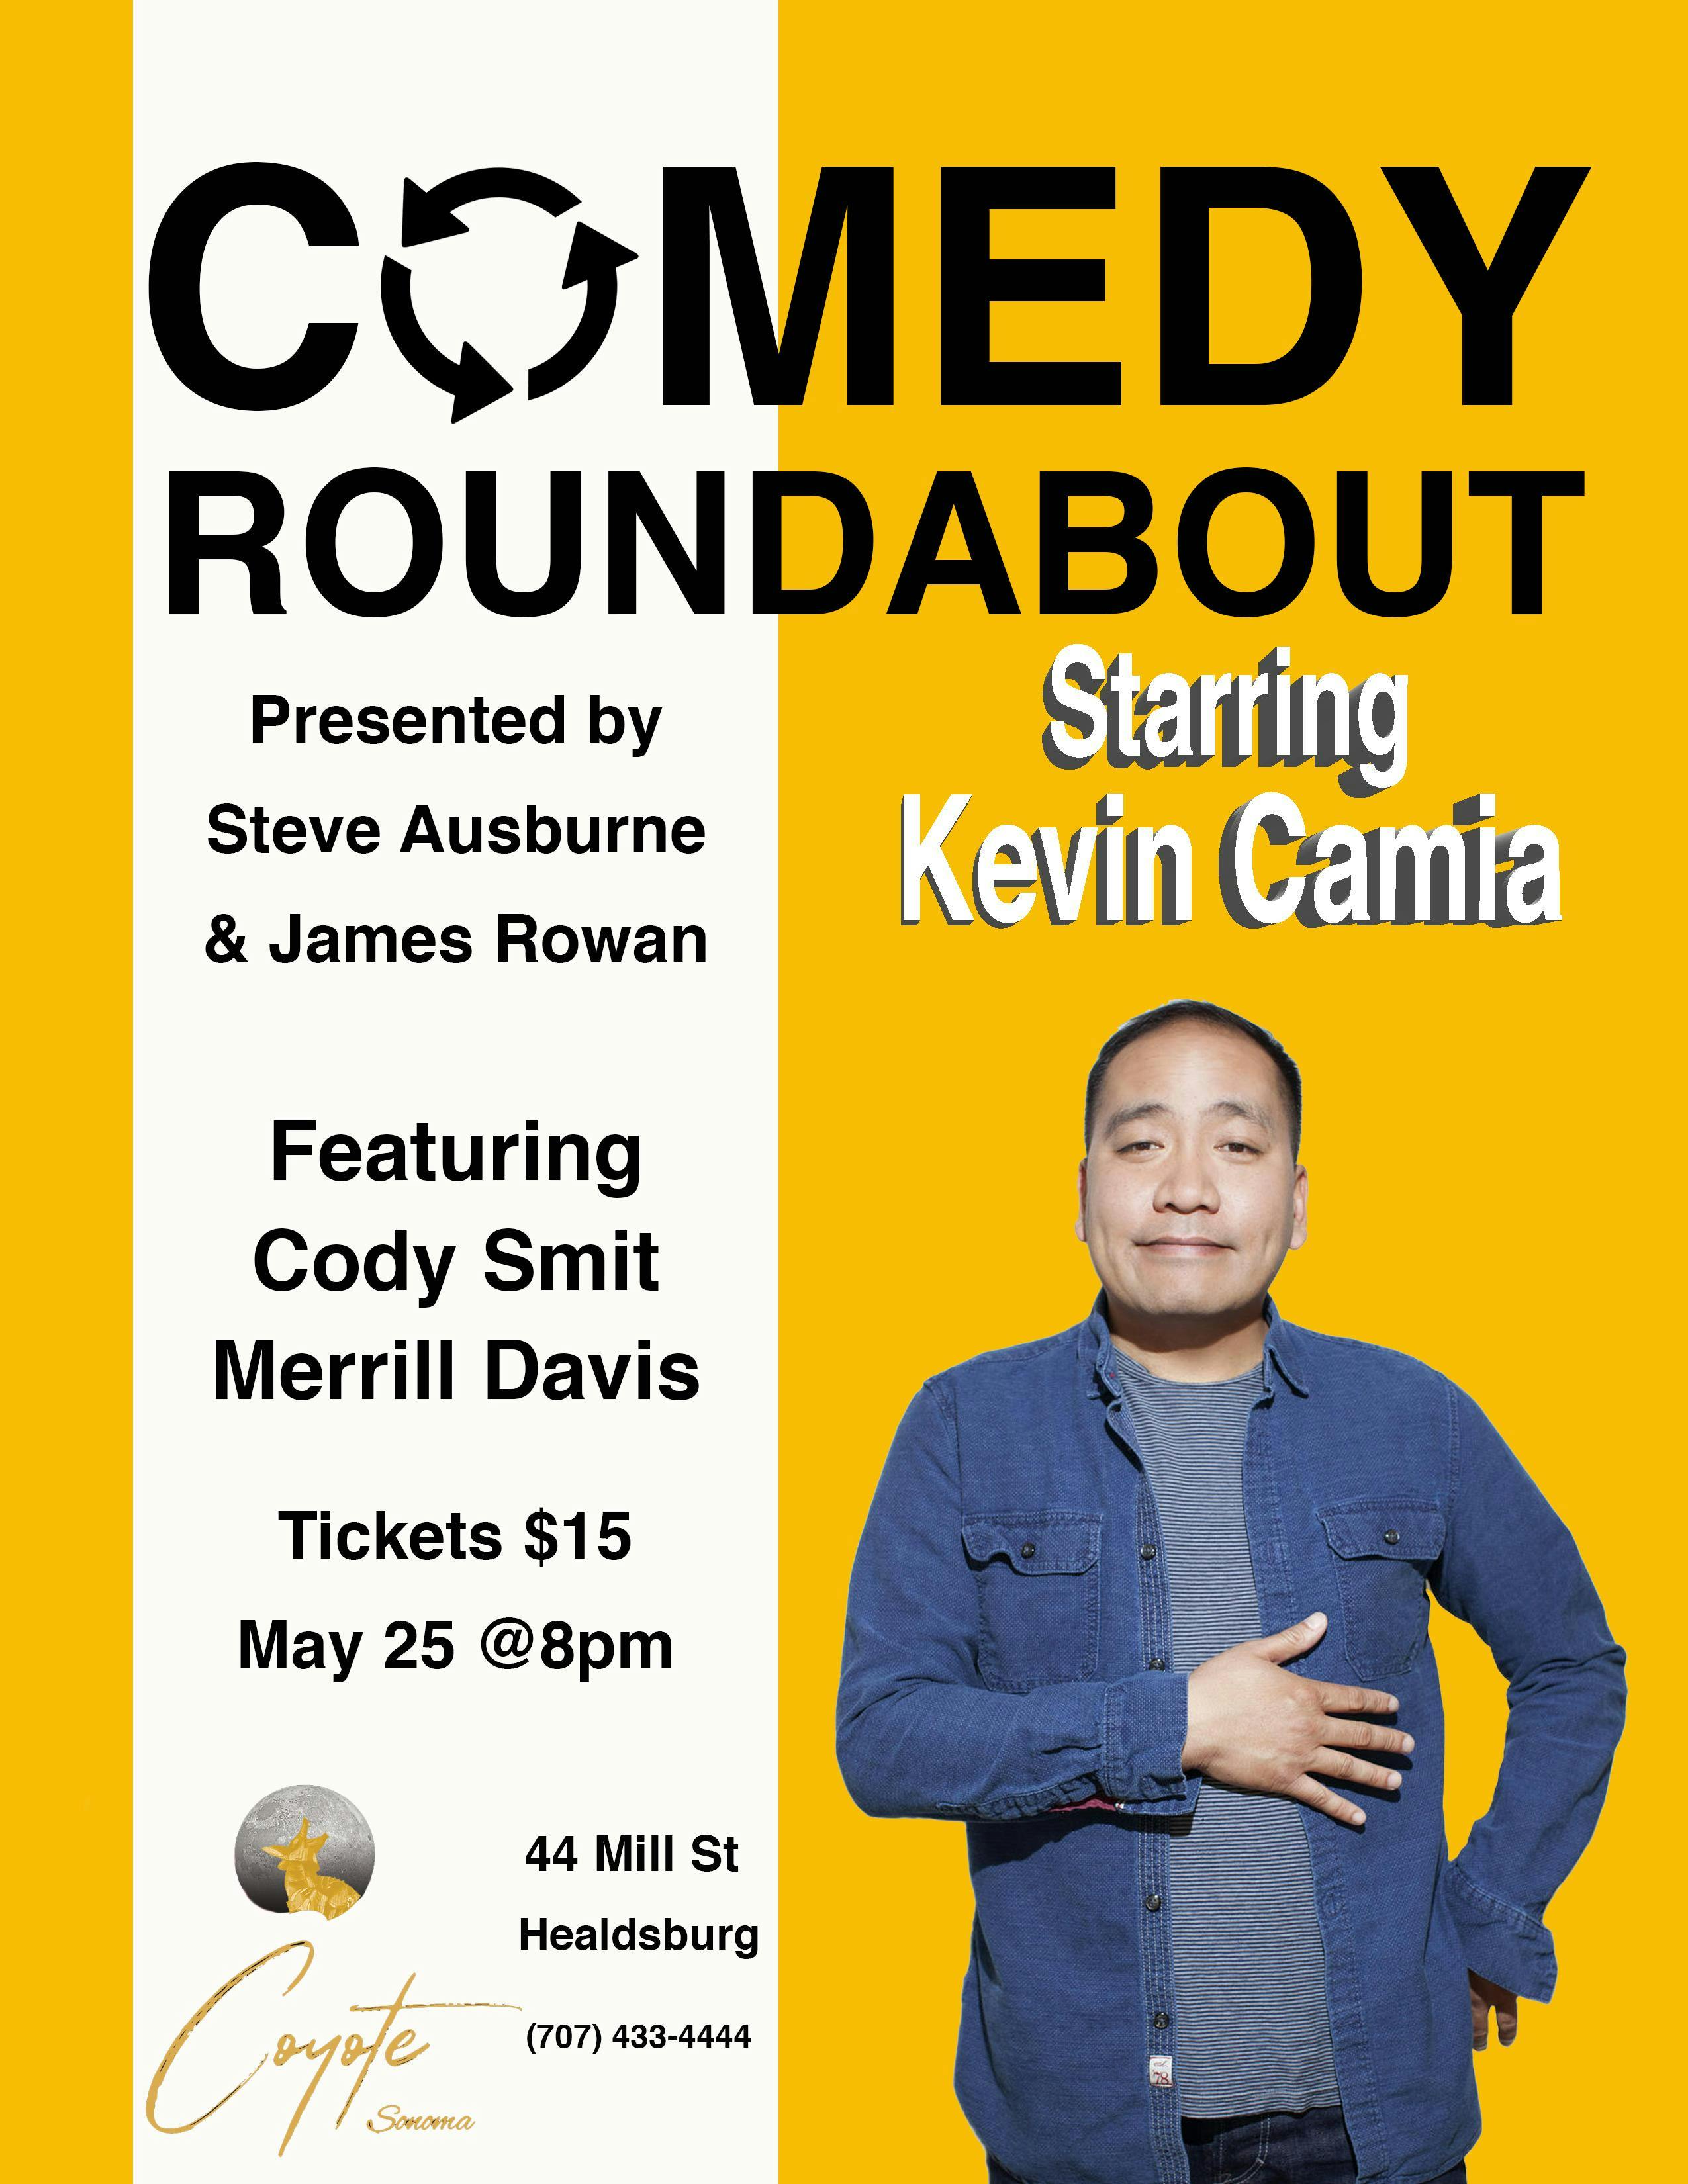 Comedy Roundabout at Coyote Sonoma